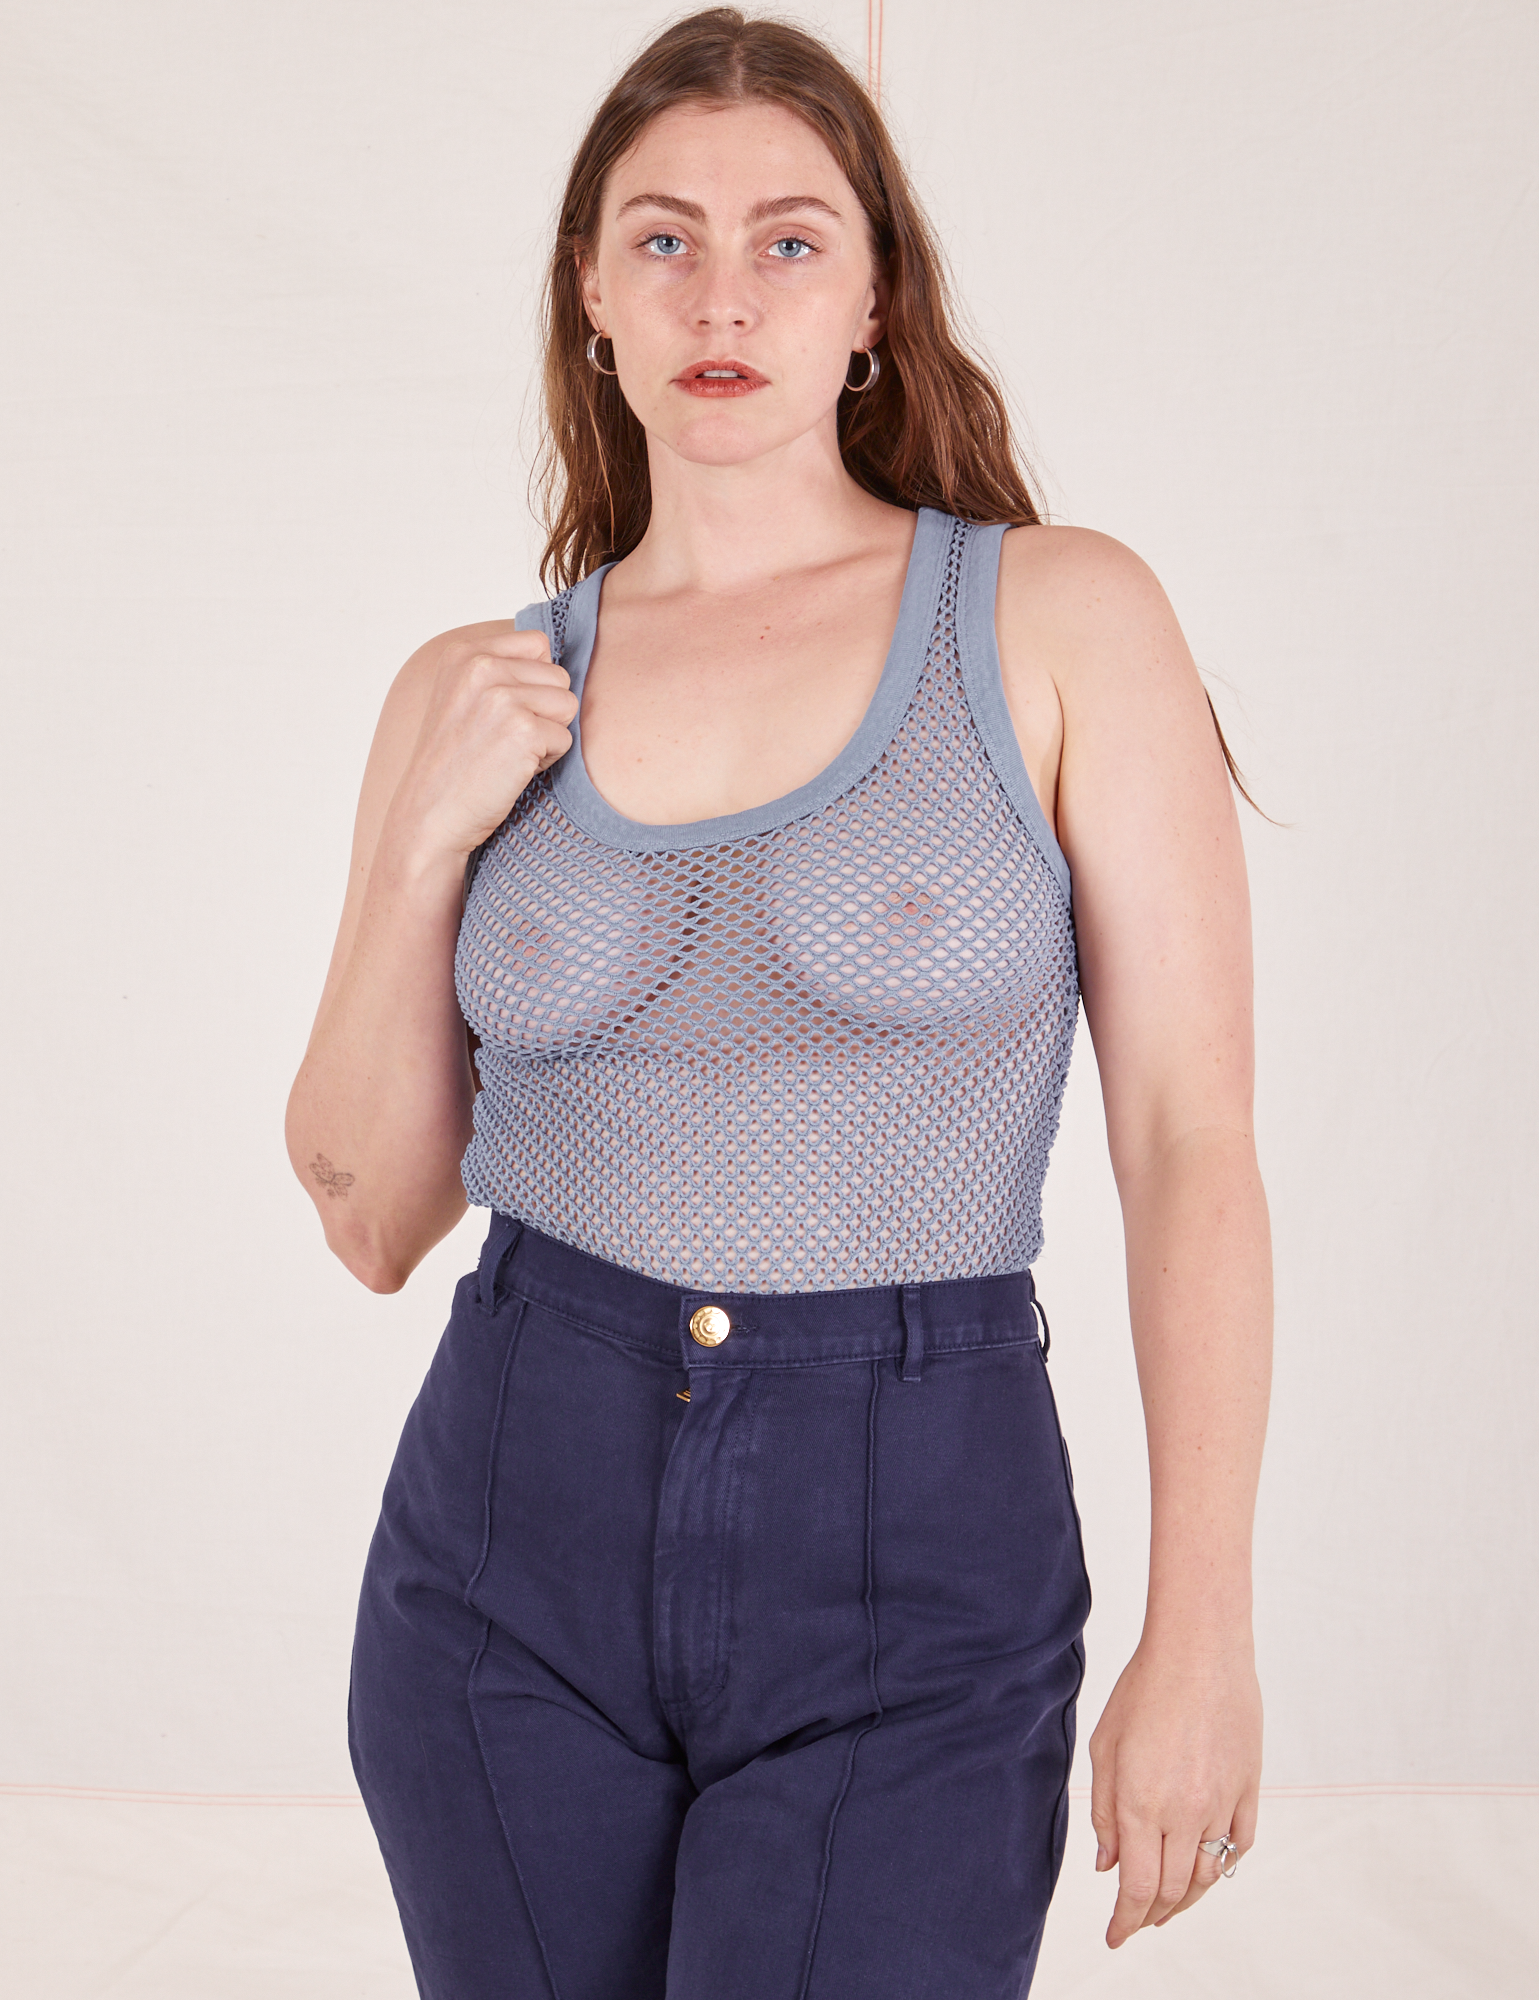 Allison is 5&#39;10 and wearing XXS Mesh Tank Top in Periwinkle paired with navy Western Pants